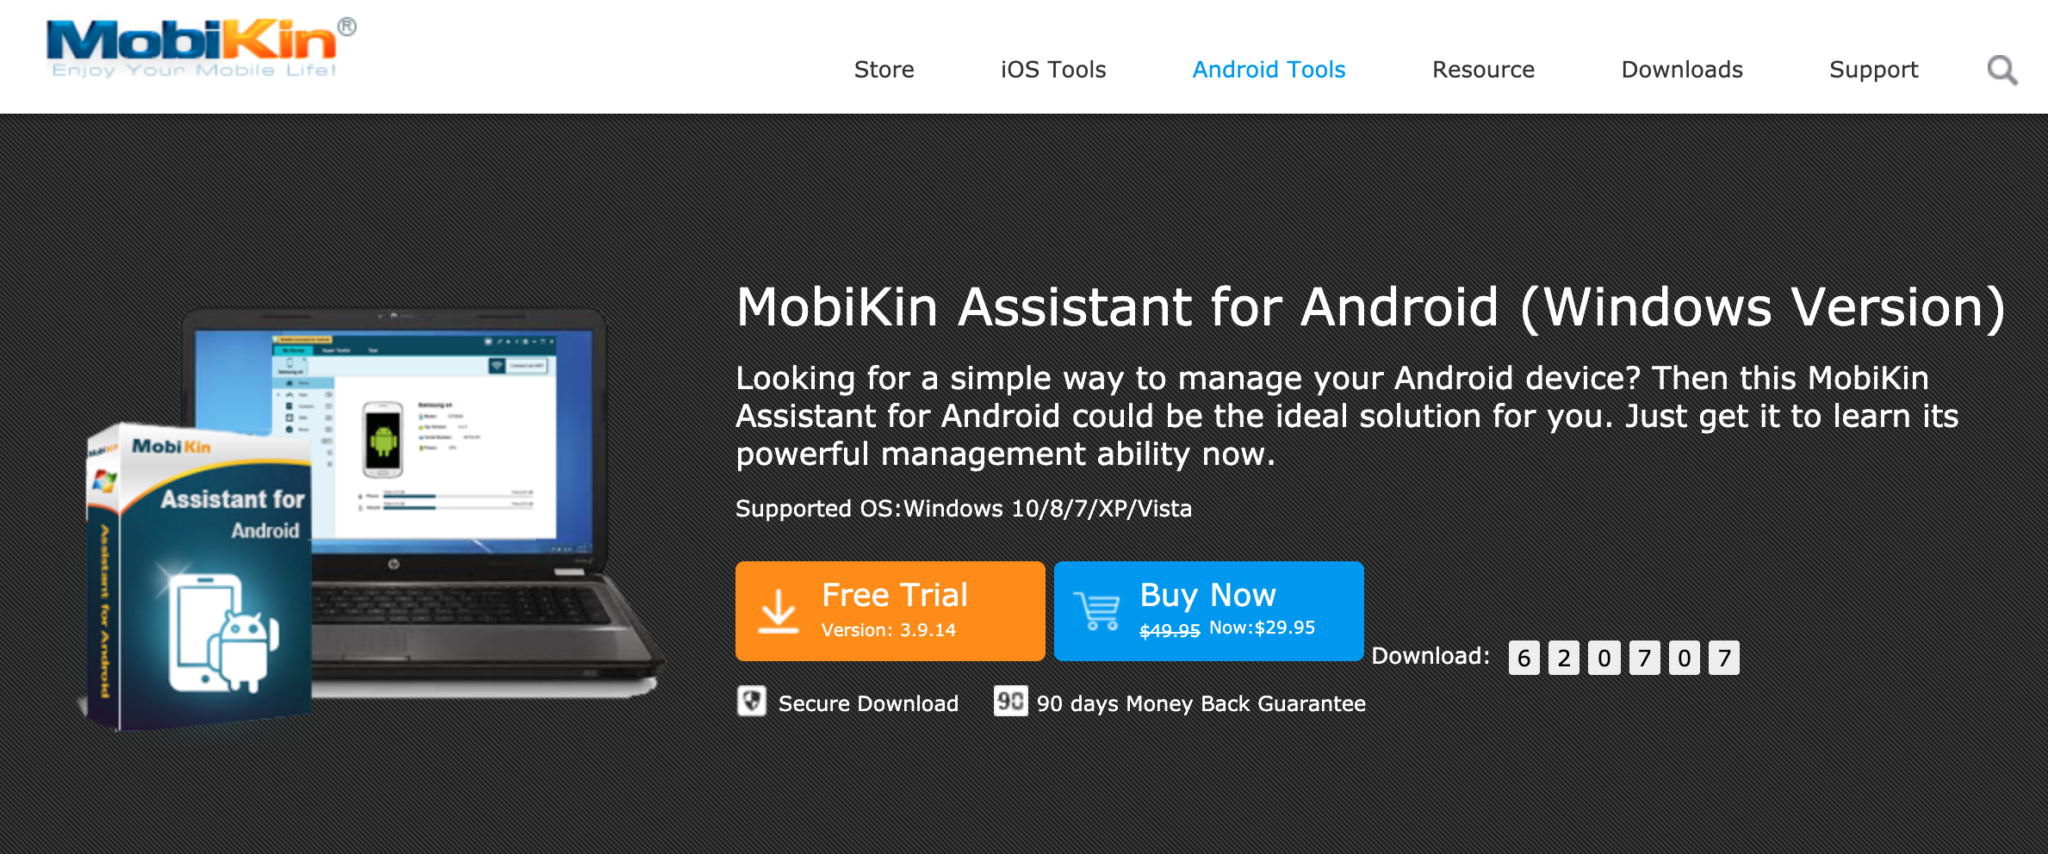 mobikin assistant for android 2.1.163 registration code